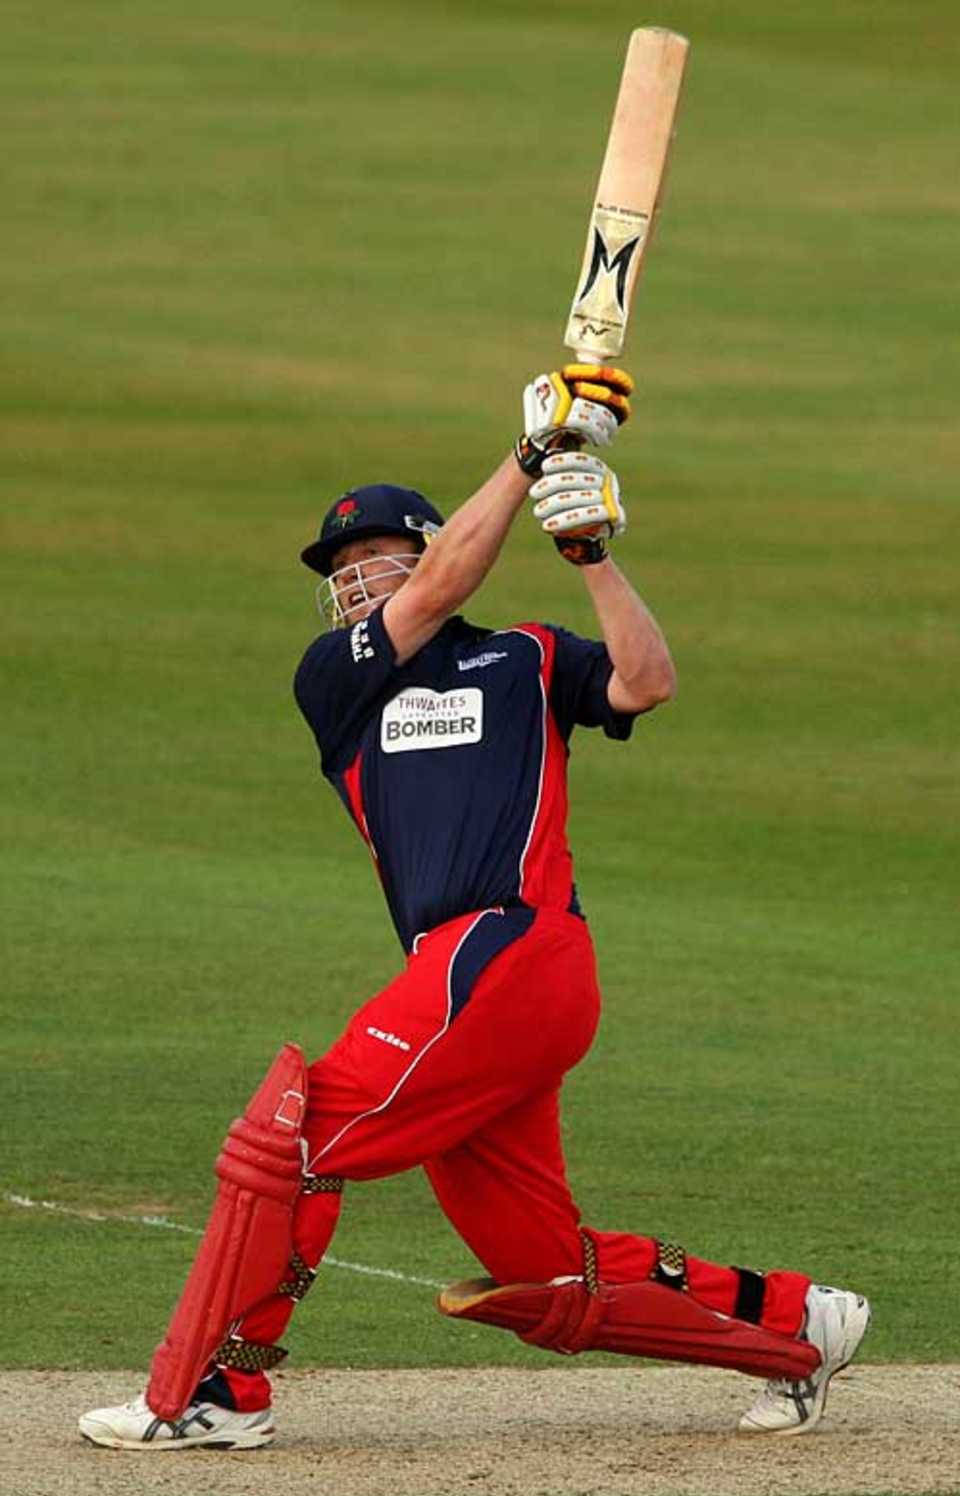 Andrew Flintoff hit 53 as Lancashire fell short in their chase